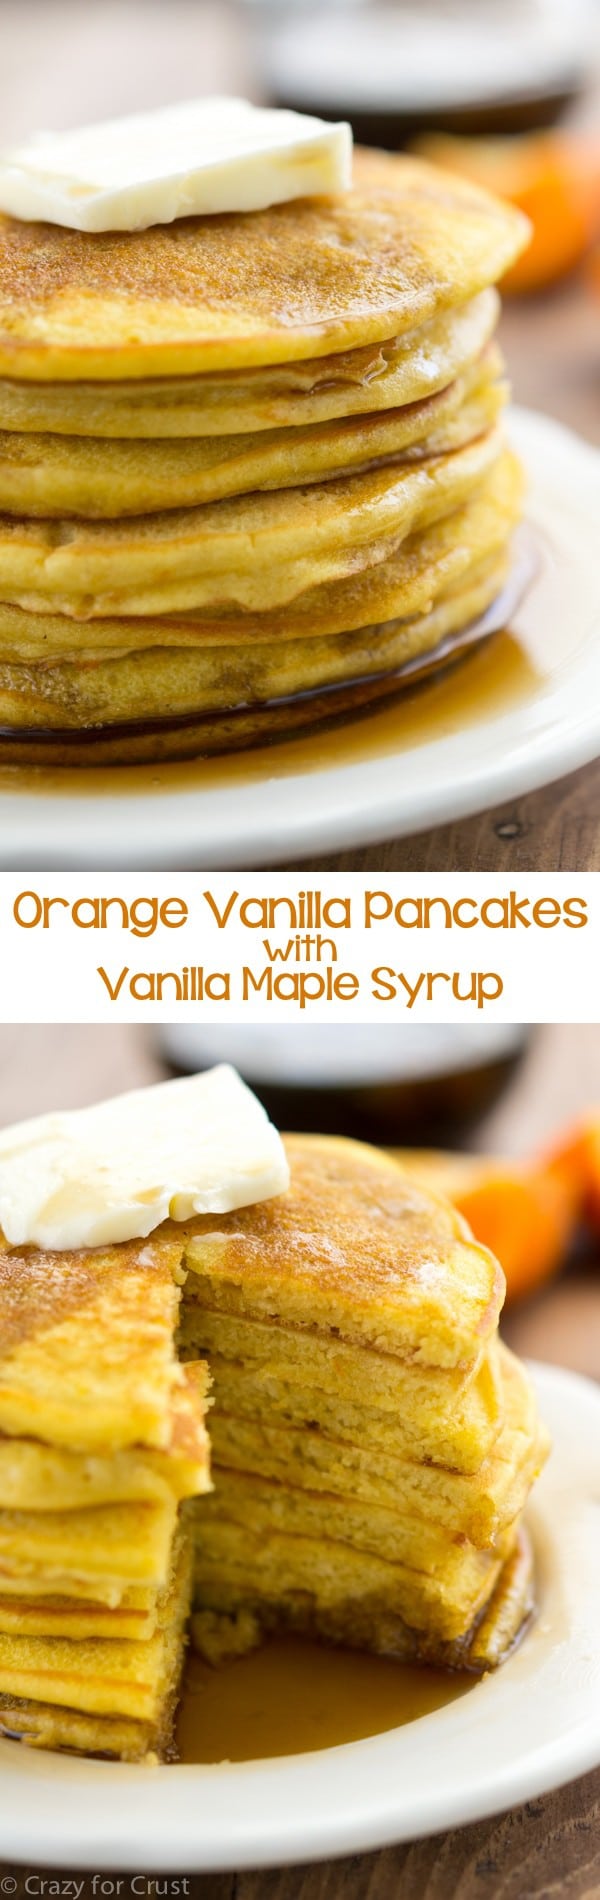 Orange Vanilla Pancakes with vanilla maple syrup - this is such an easy pancake recipe! They're bursting with orange and vanilla flavor and they syrup is the best syrup recipe!